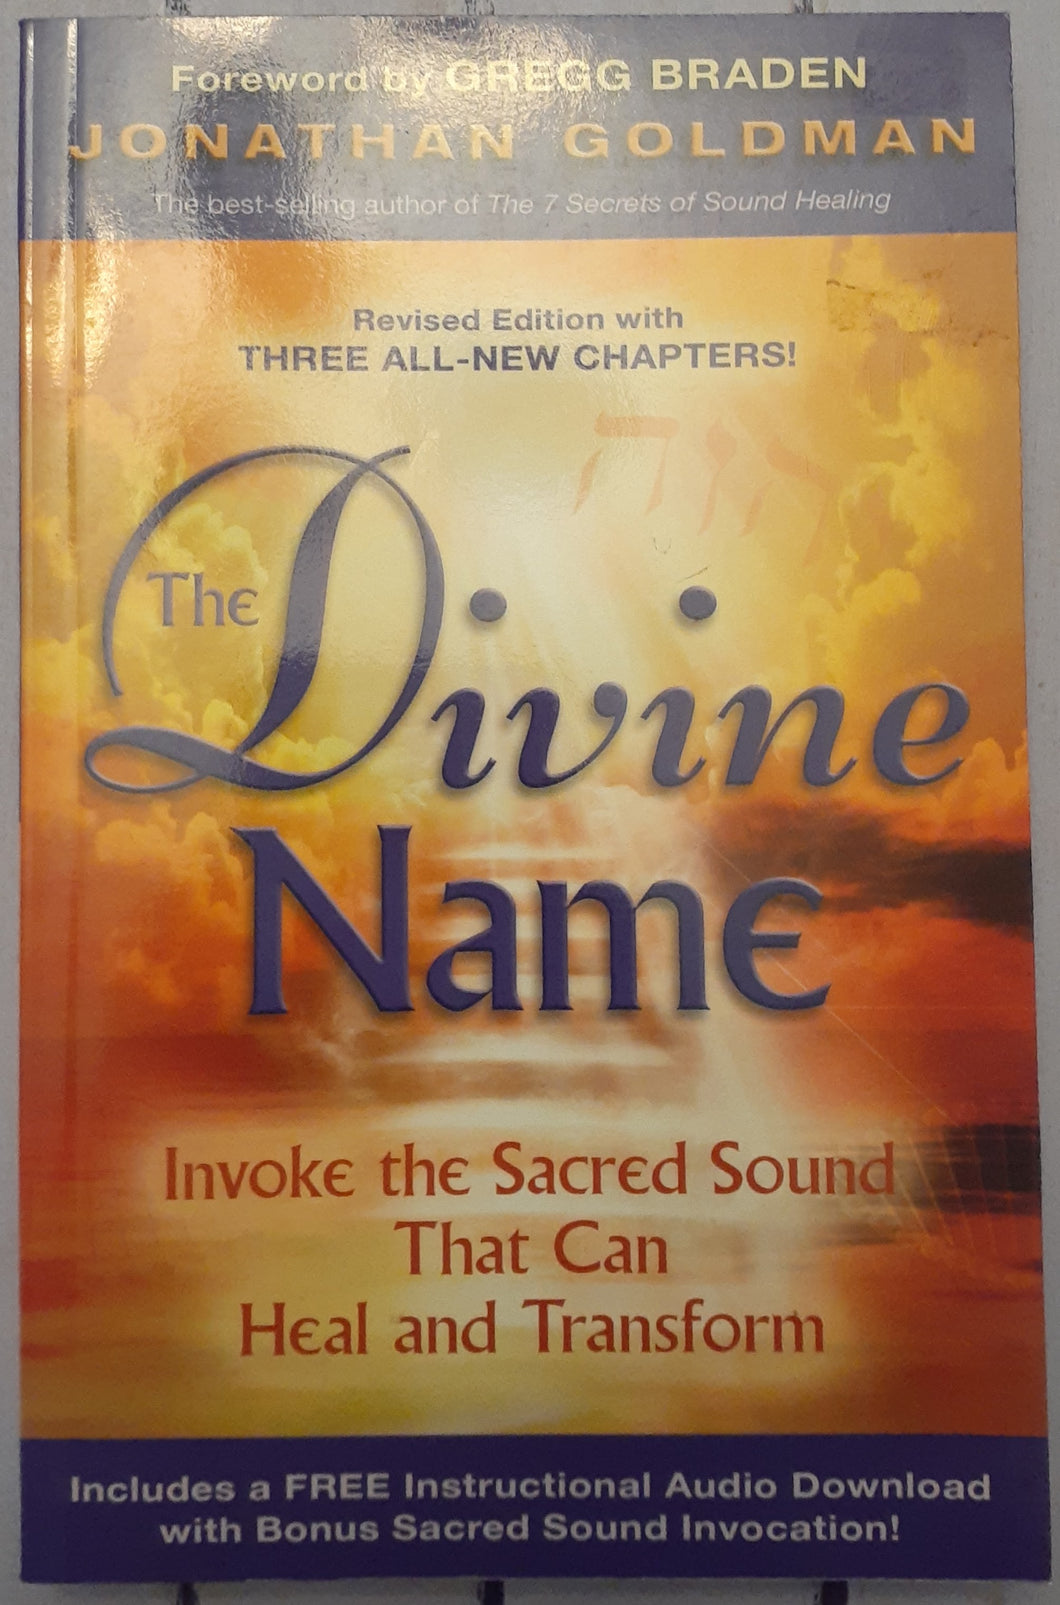 The Divine Name: The Sound That Can Change the World